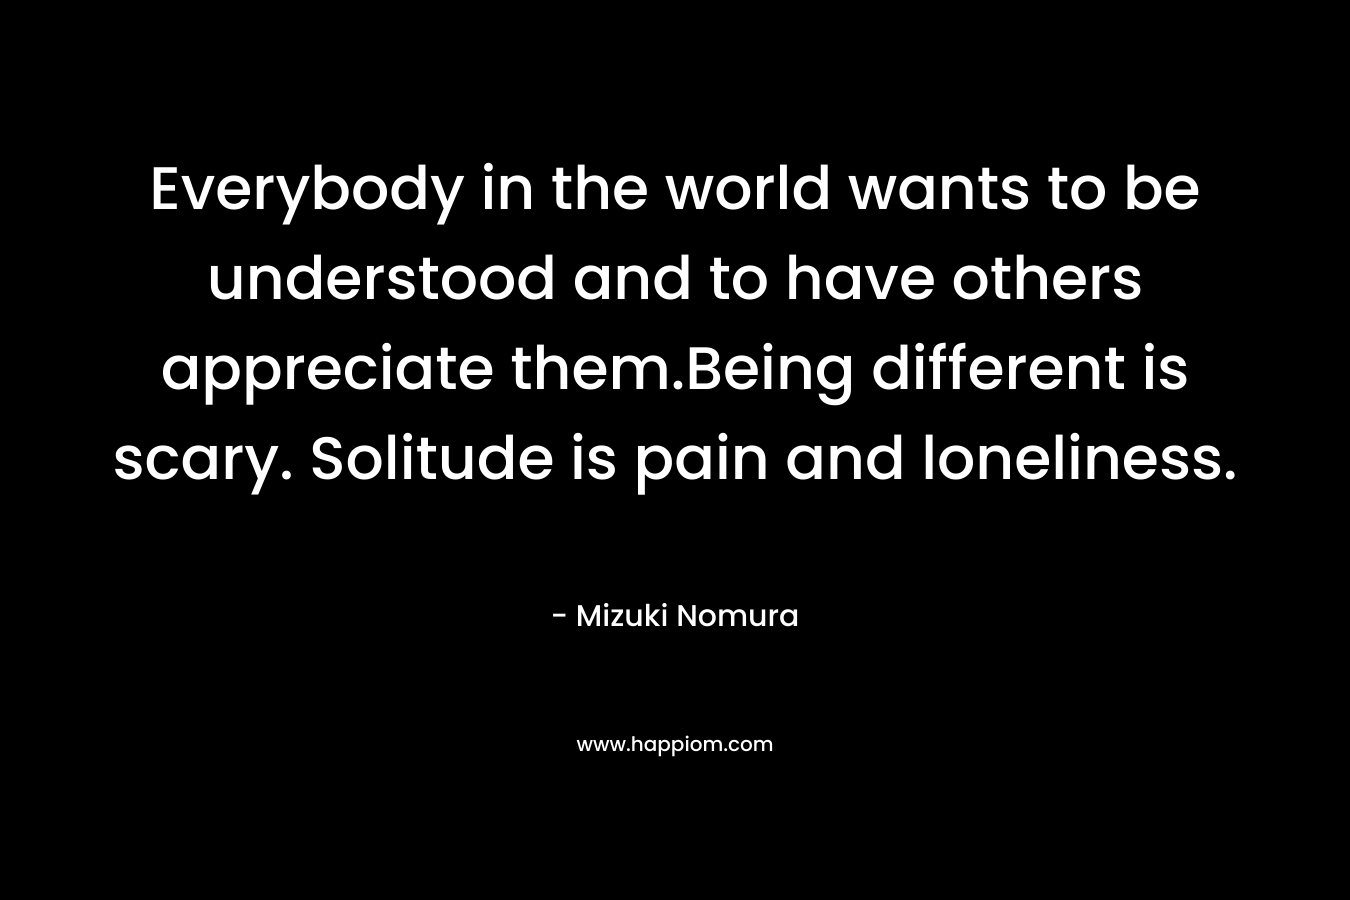 Everybody in the world wants to be understood and to have others appreciate them.Being different is scary. Solitude is pain and loneliness. – Mizuki Nomura